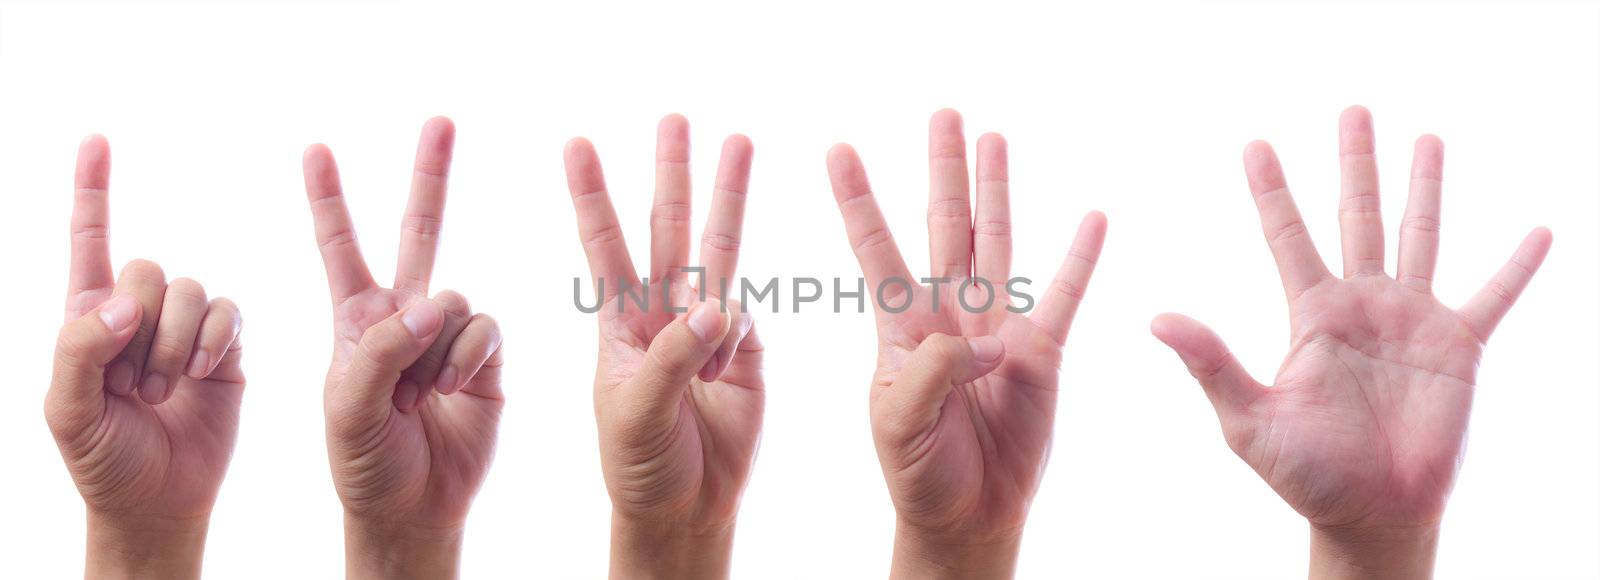 Hands count one to five by tungphoto